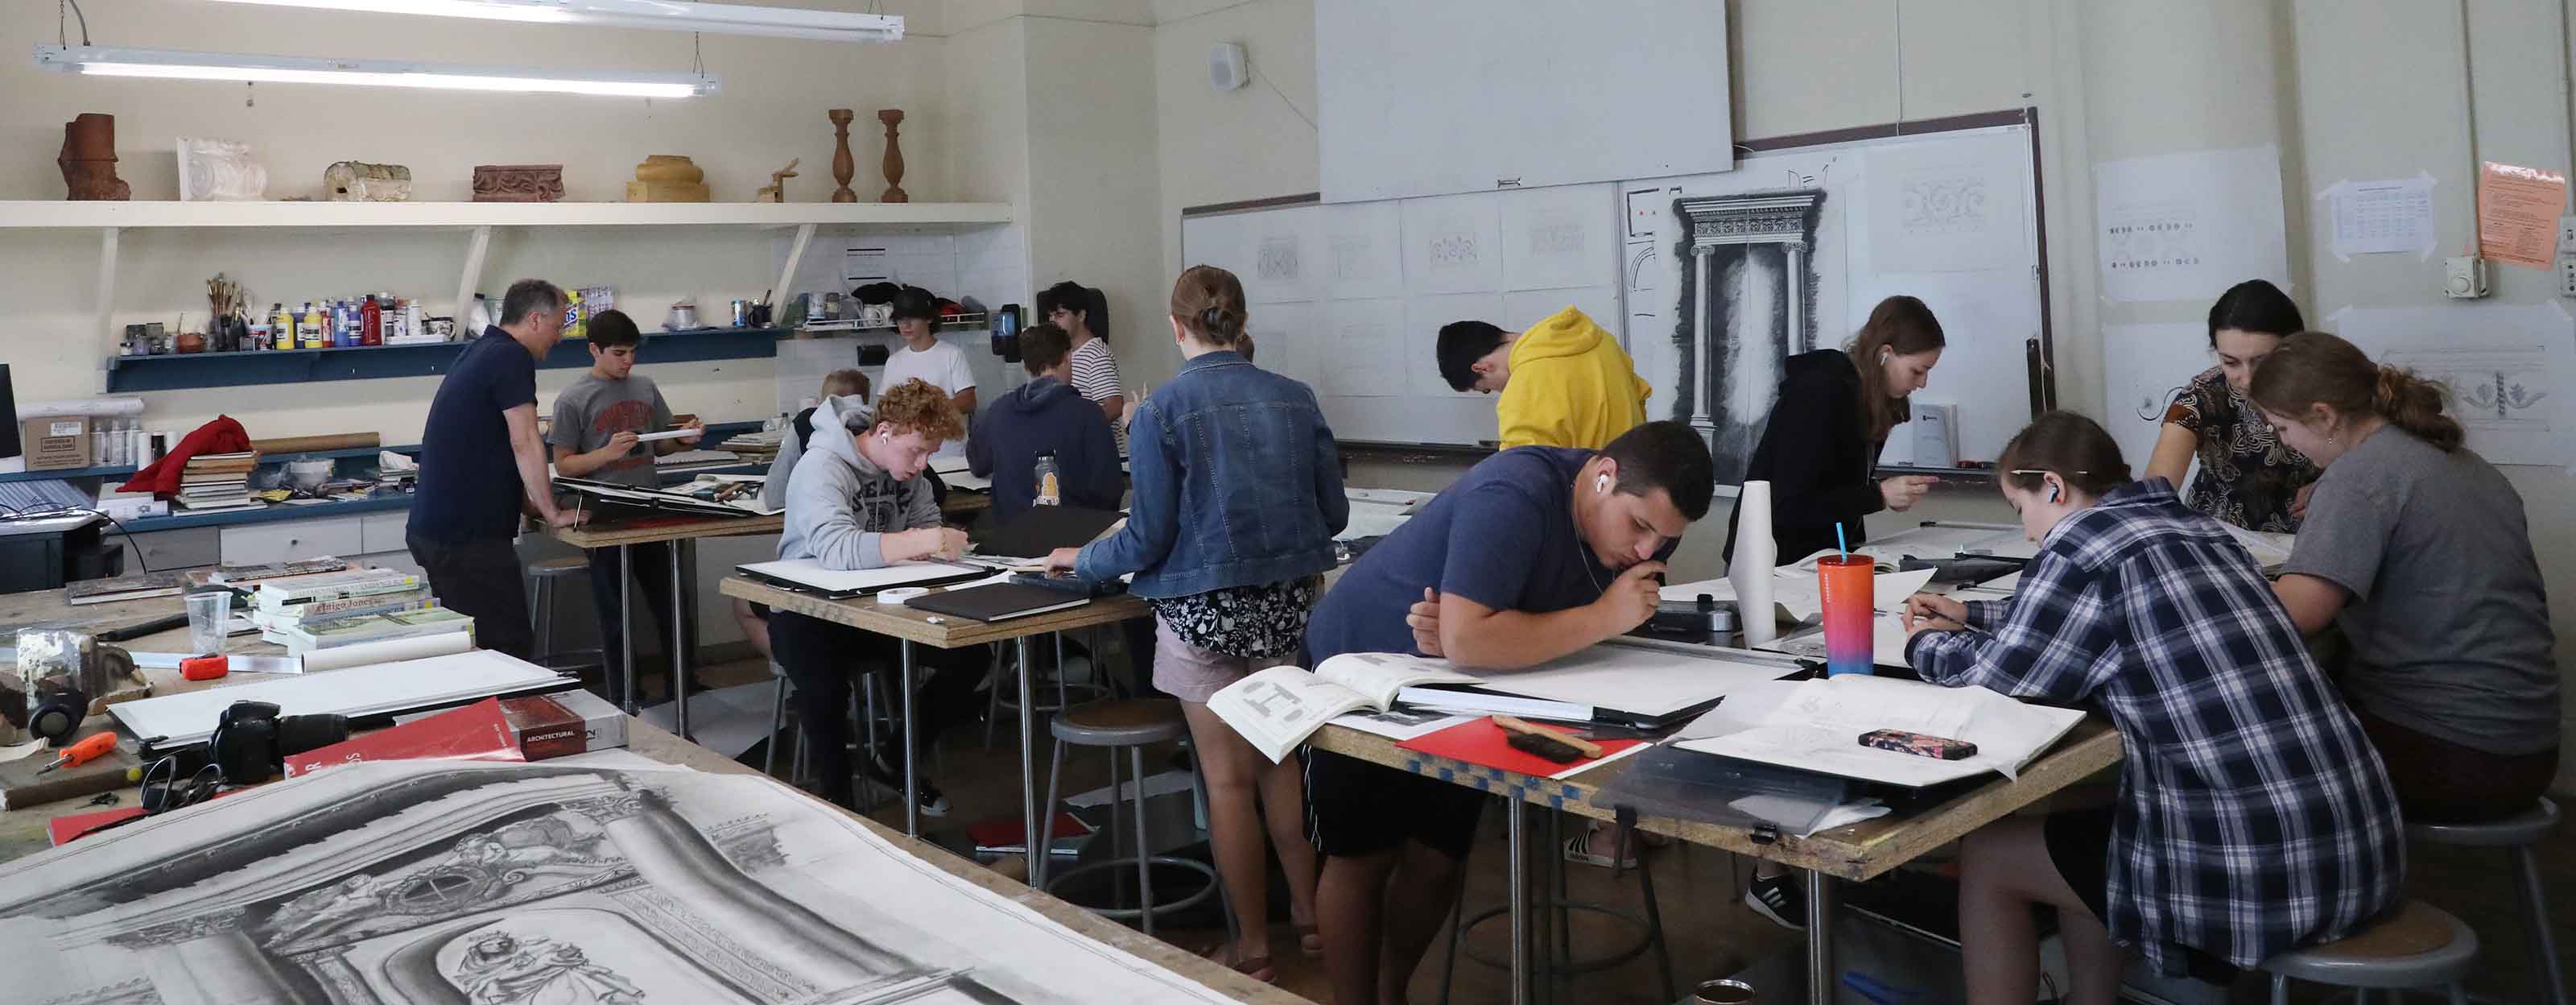 Students working during the summer Architecture Intensive